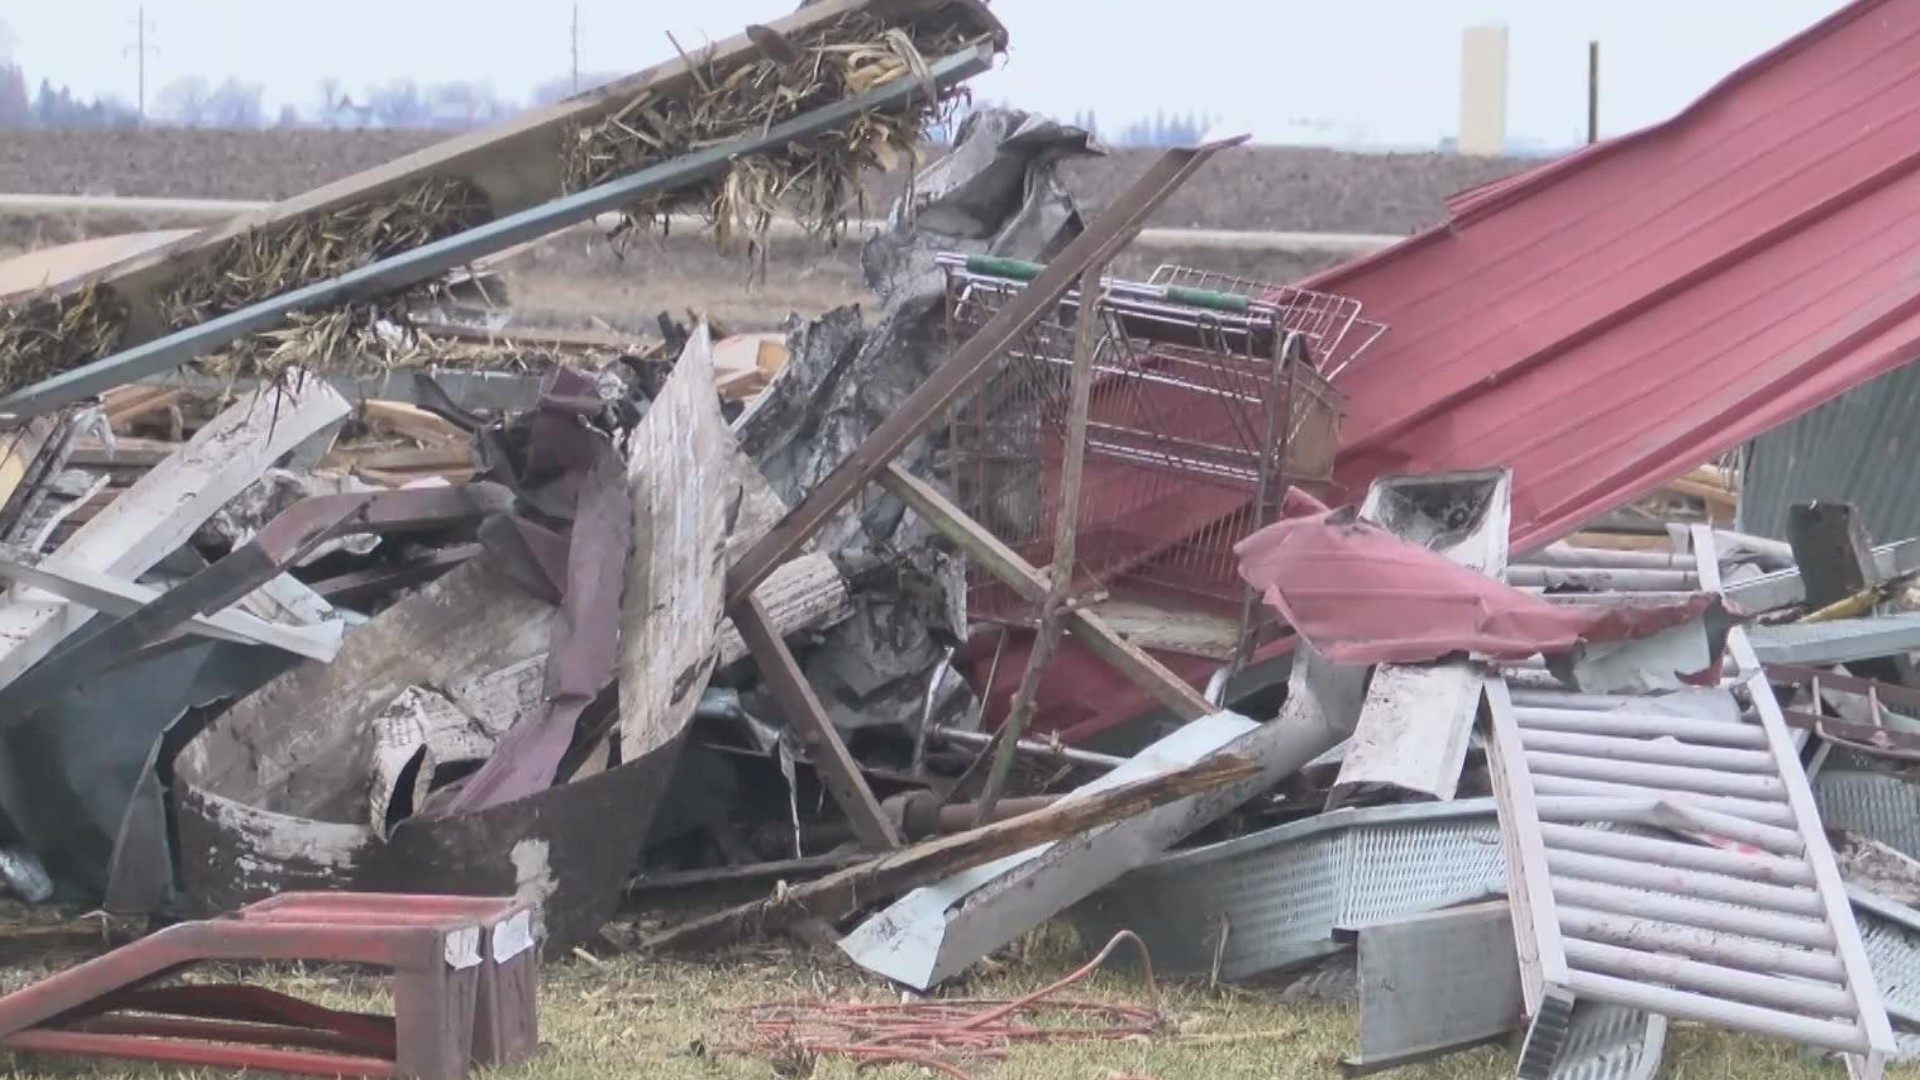 Approximately a dozen buildings sustained severe damage in what the National Weather Service has confirmed was an EF-2 tornado.